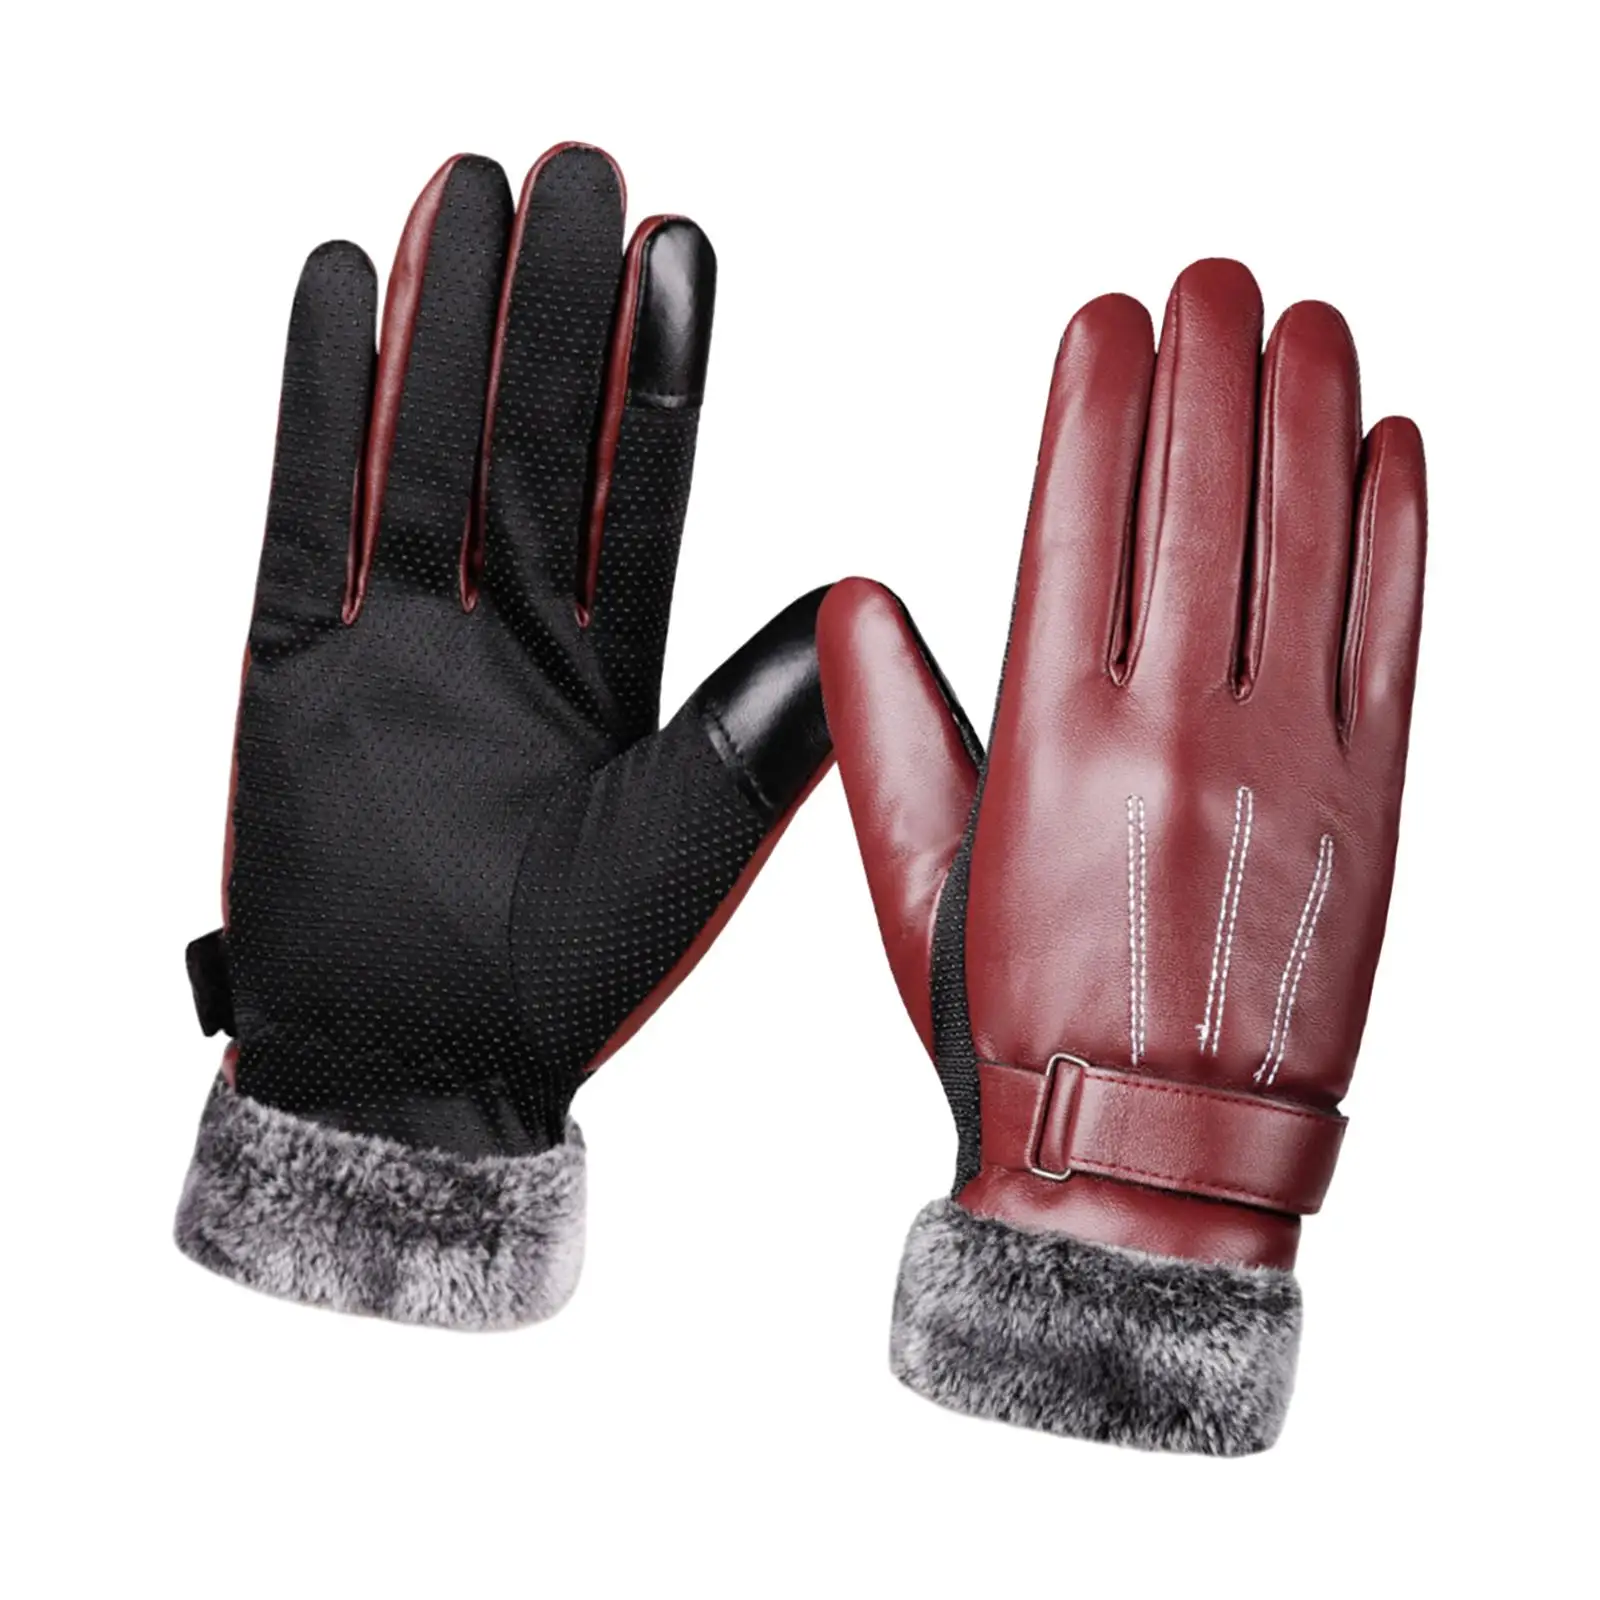 Women Winter Gloves PU Leather Warm Gloves Touchscreen Cycling Gloves for Riding